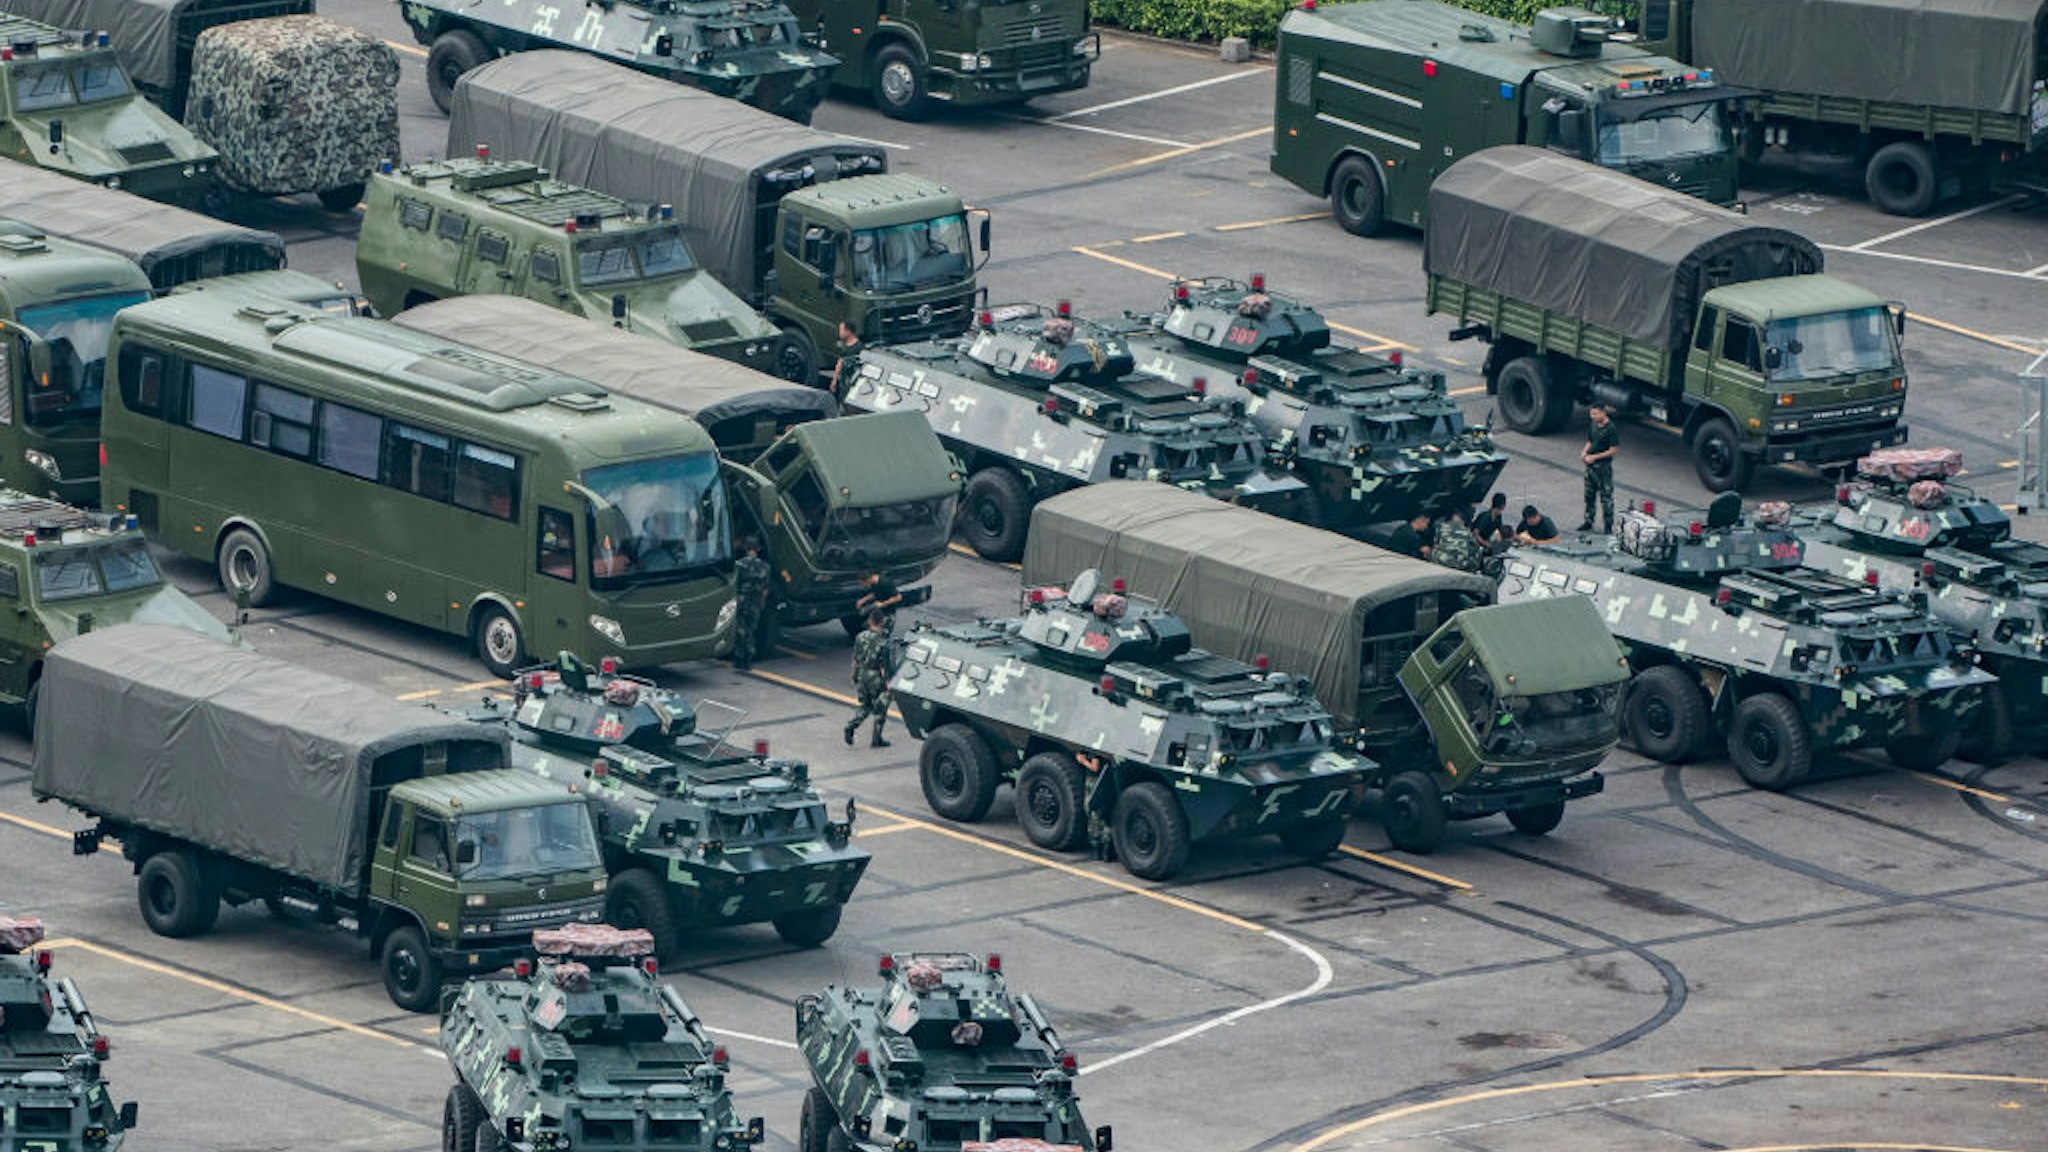 SHENZHEN, CHINA - AUGUST 16: Chinese military personnel maintain trucks and armoured personnel vehicles parked outside the Shenzhen Bay stadium on August 16, 2019 in Shenzhen, China. Pro-democracy protesters have continued rallies on the streets of Hong Kong against a controversial extradition bill since 9 June as the city plunged into crisis after waves of demonstrations and several violent clashes. Hong Kong's Chief Executive Carrie Lam apologized for introducing the bill and declared it "dead", however protesters have continued to draw large crowds with demands for Lam's resignation and completely withdraw the bill.